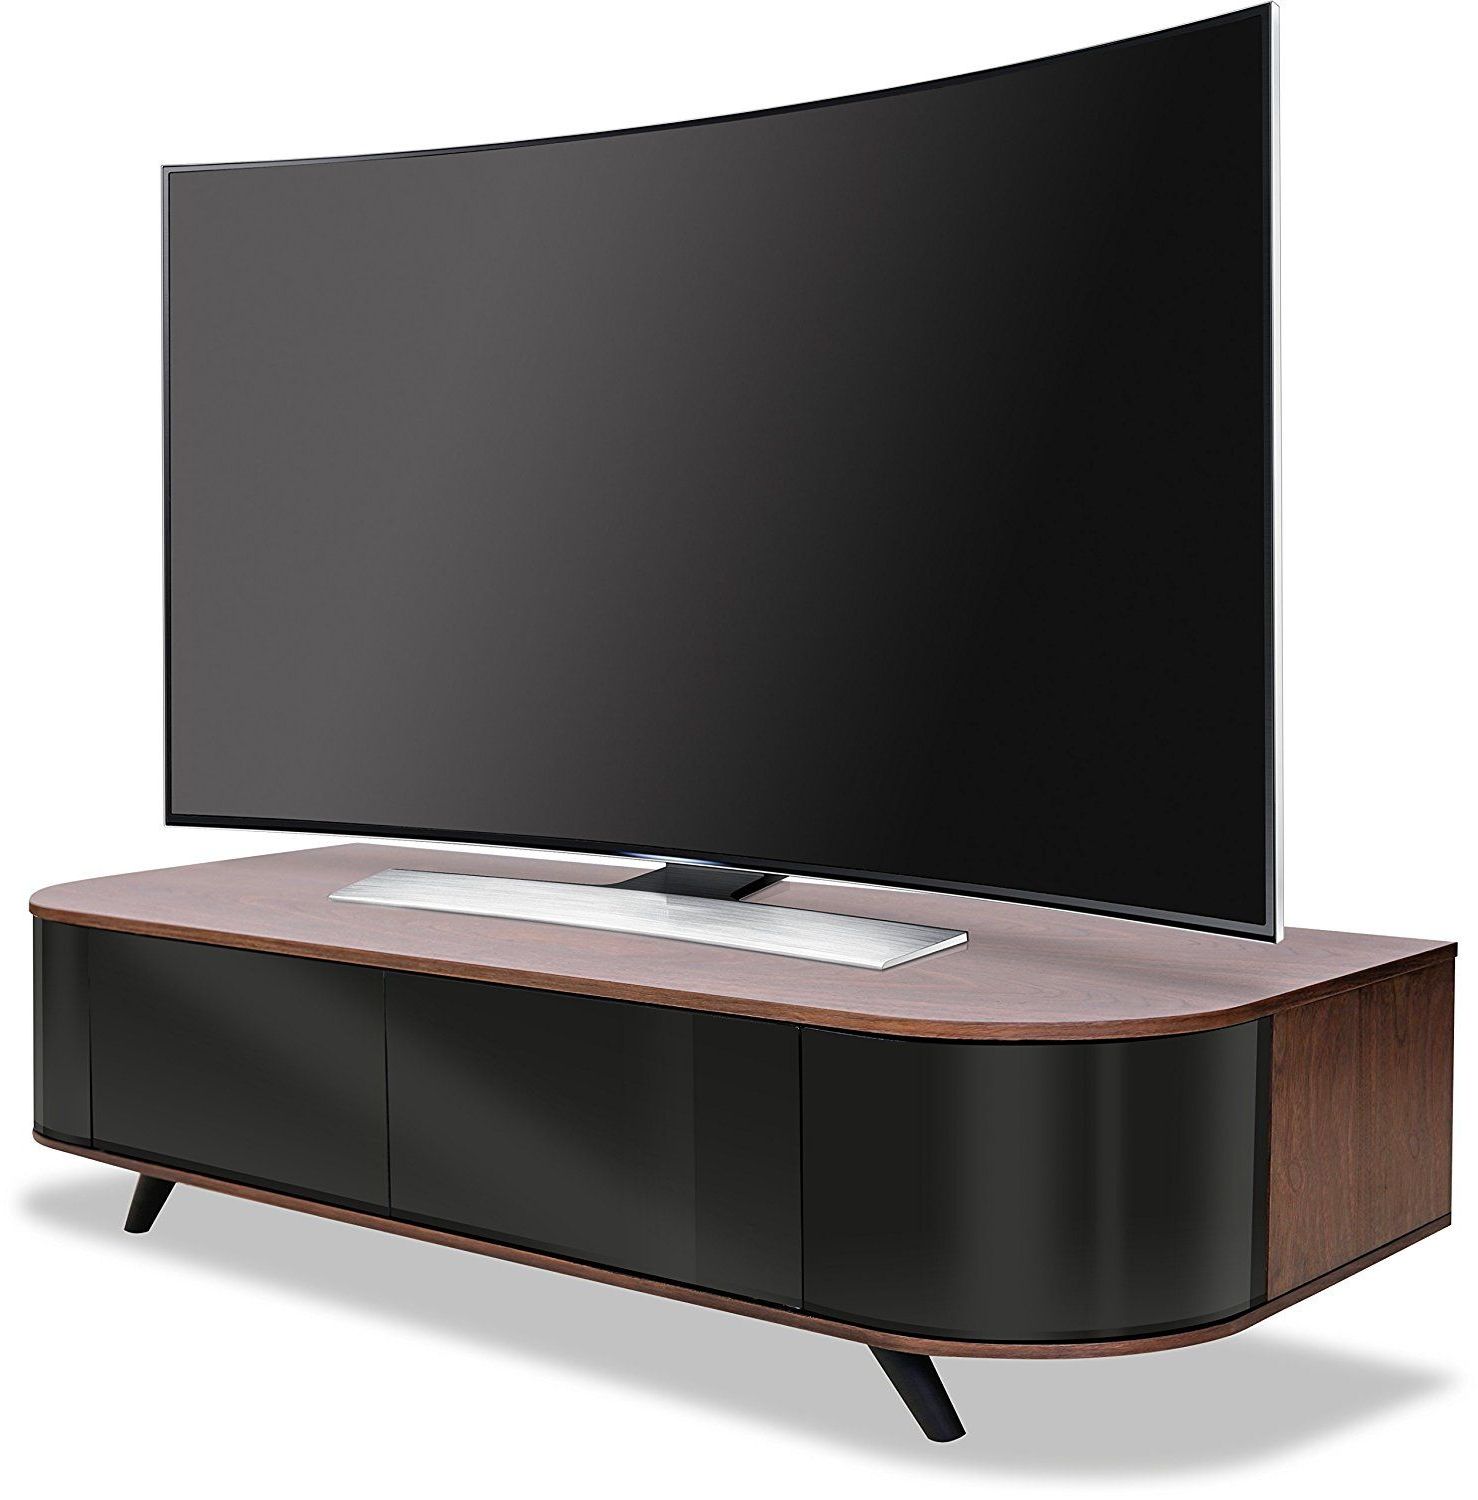 Centurion Supports Lotte Beam Thru Remote Friendly: Amazon.co.uk Intended For Best And Newest Beam Thru Tv Cabinets (Photo 4 of 20)